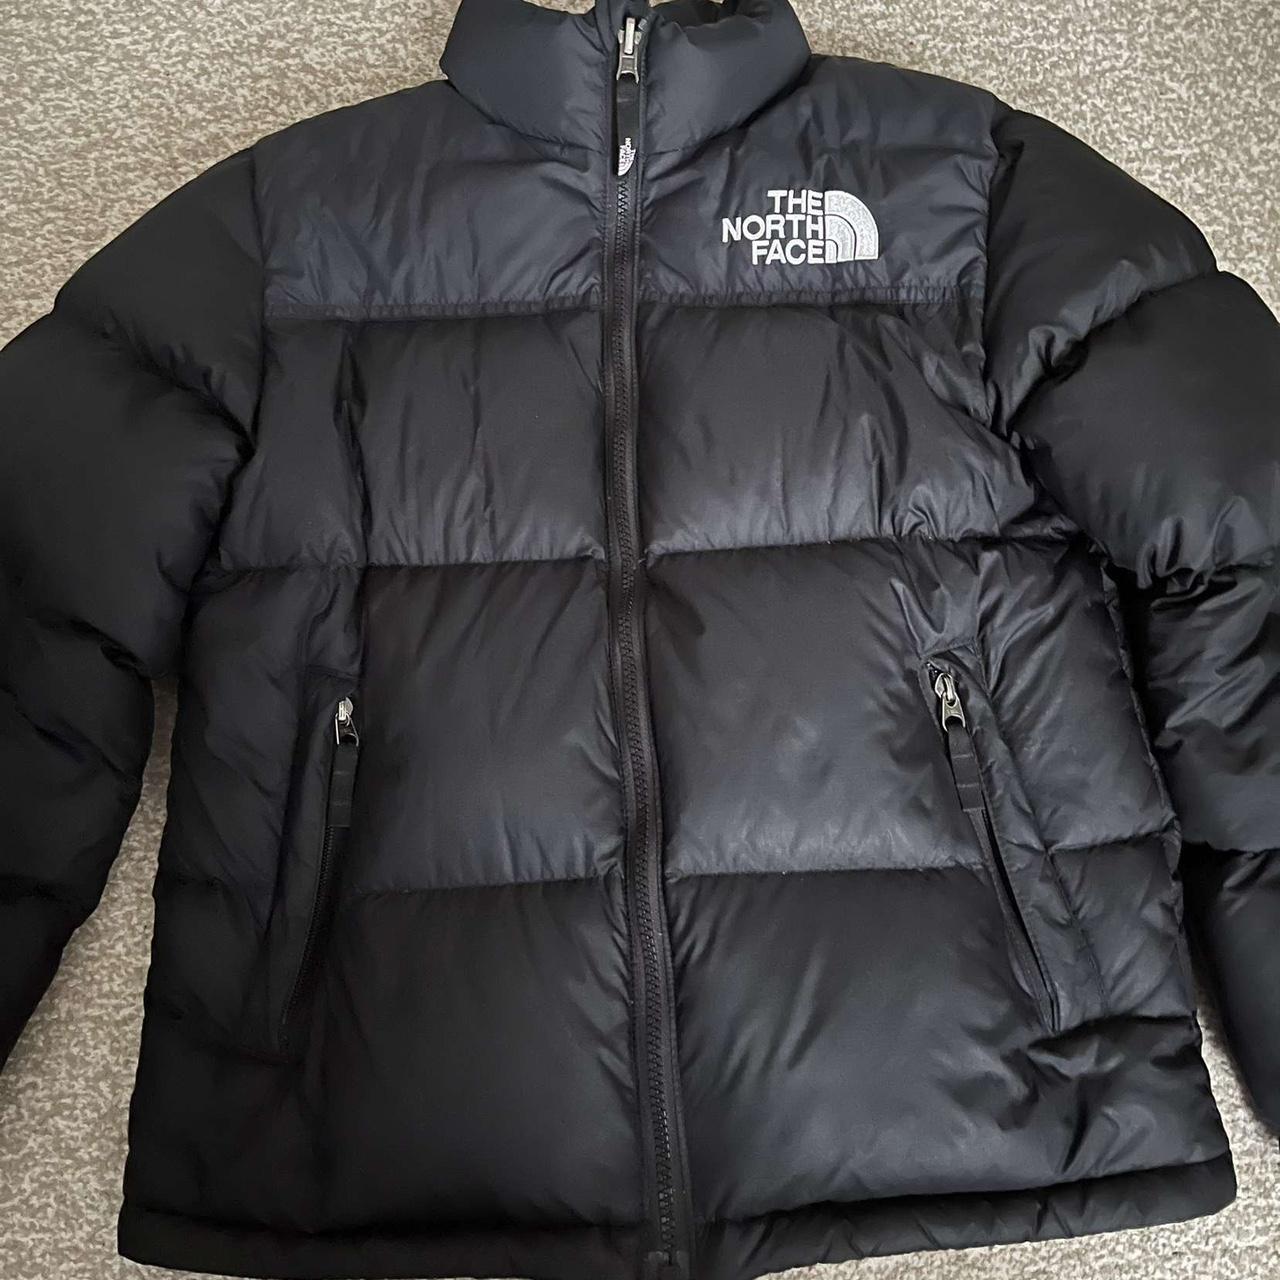 Black north face puffer. Kids size L so would fit... - Depop